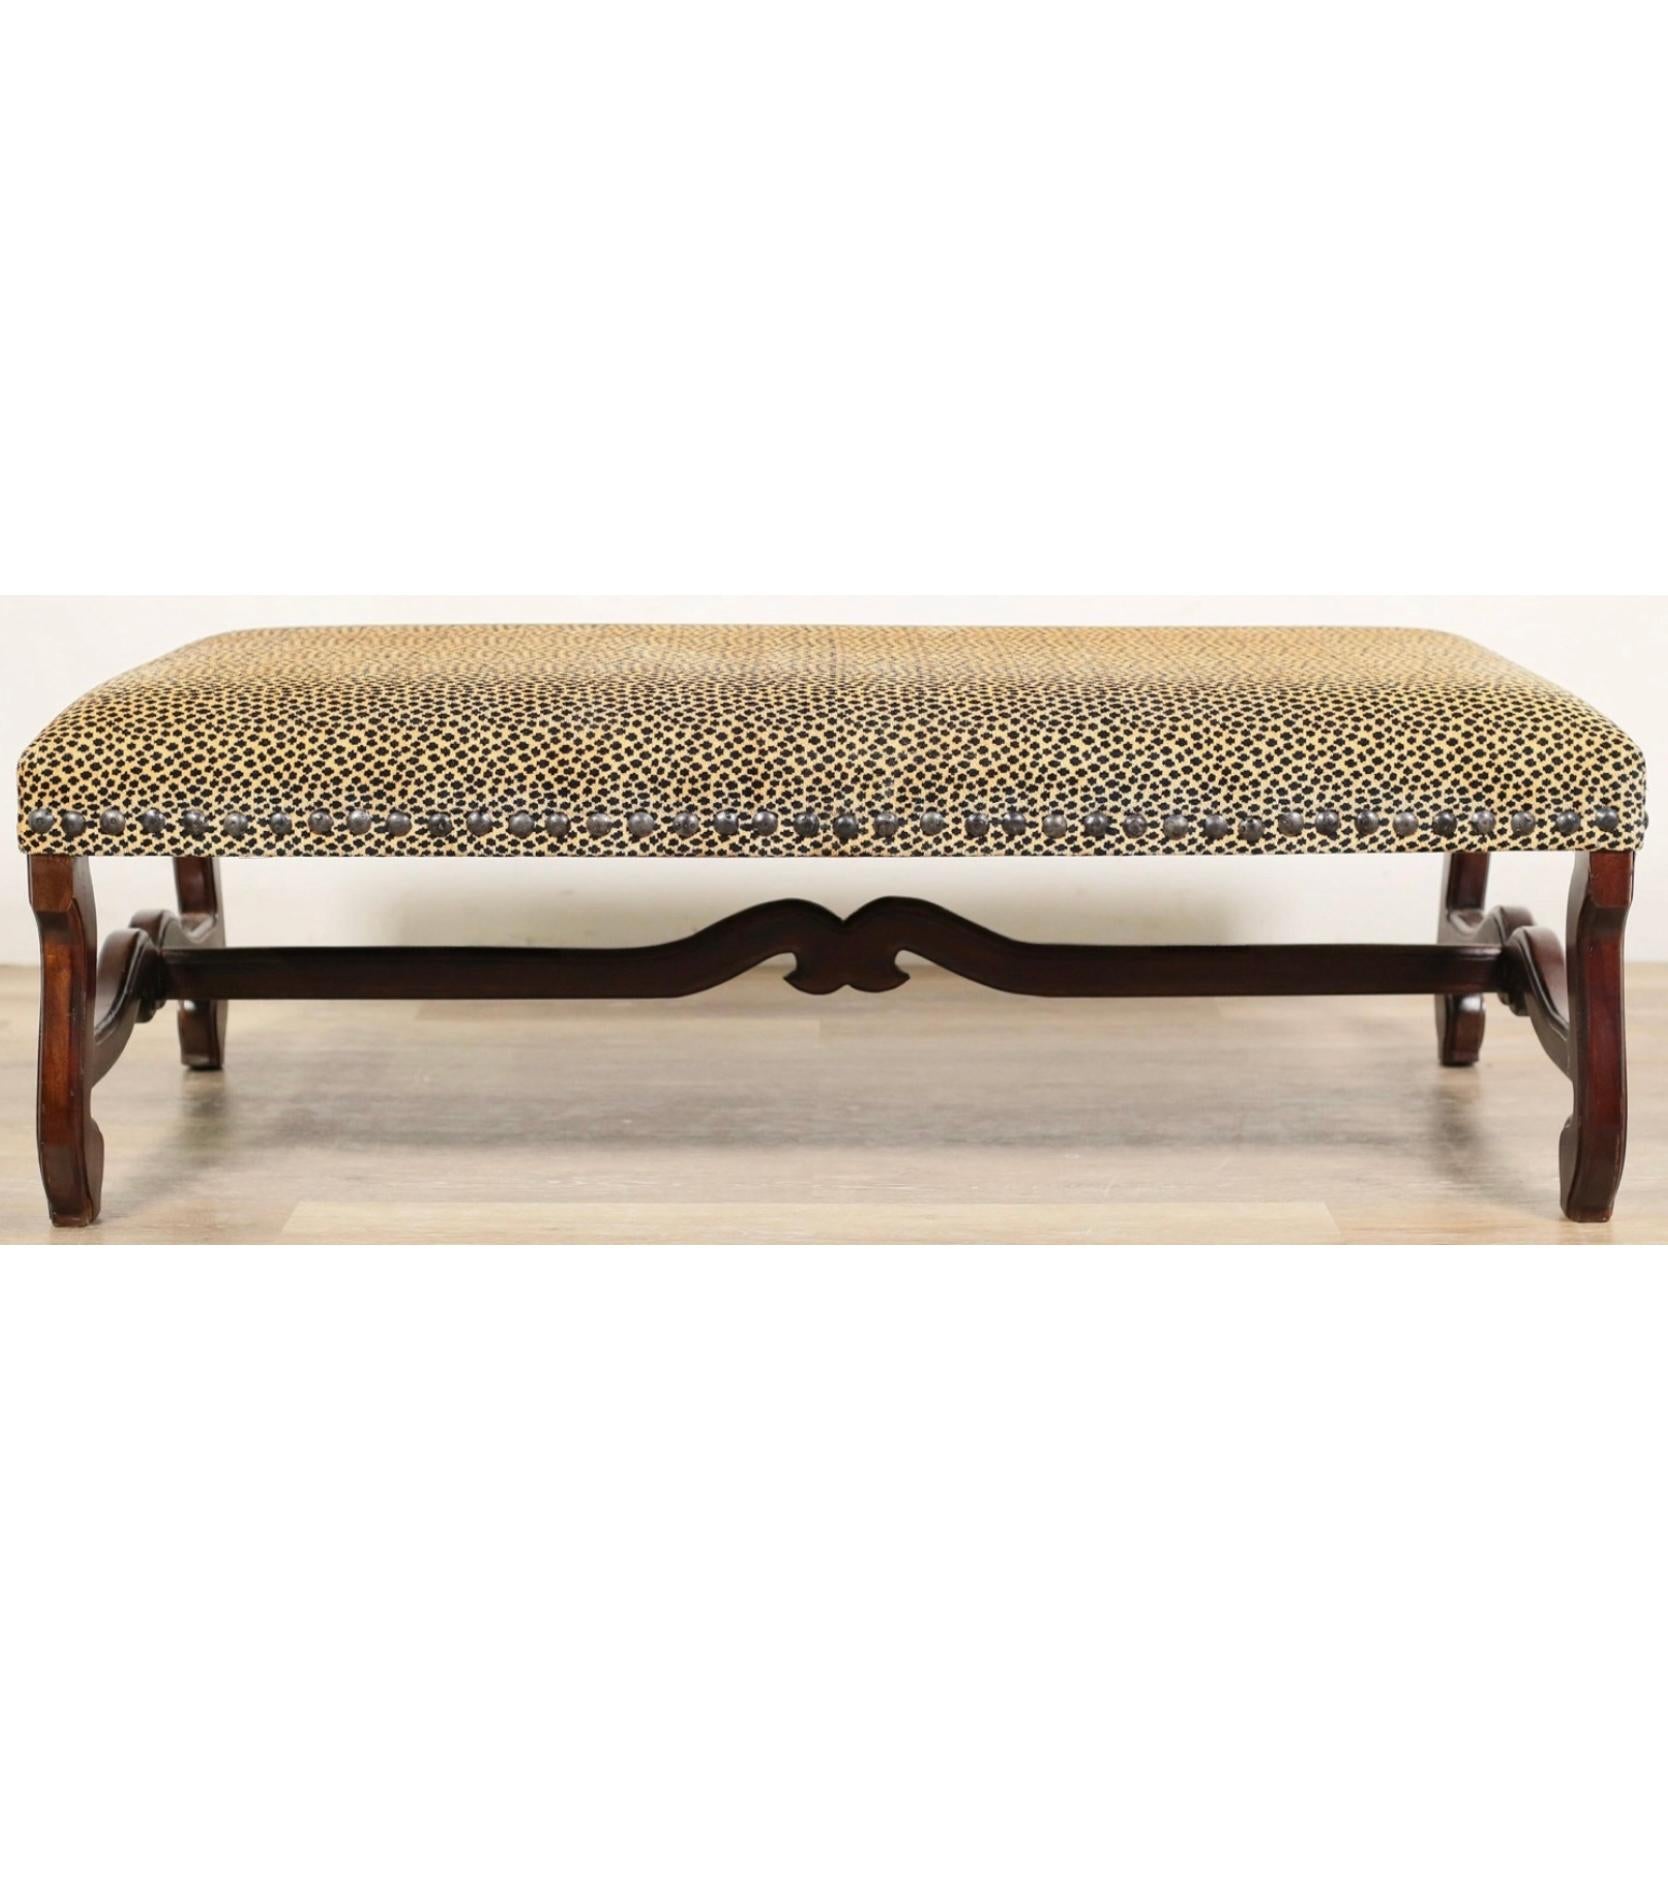 French Style Carved Oak Ottoman W/ Nailheads In Leopard Upholstery For Sale 1